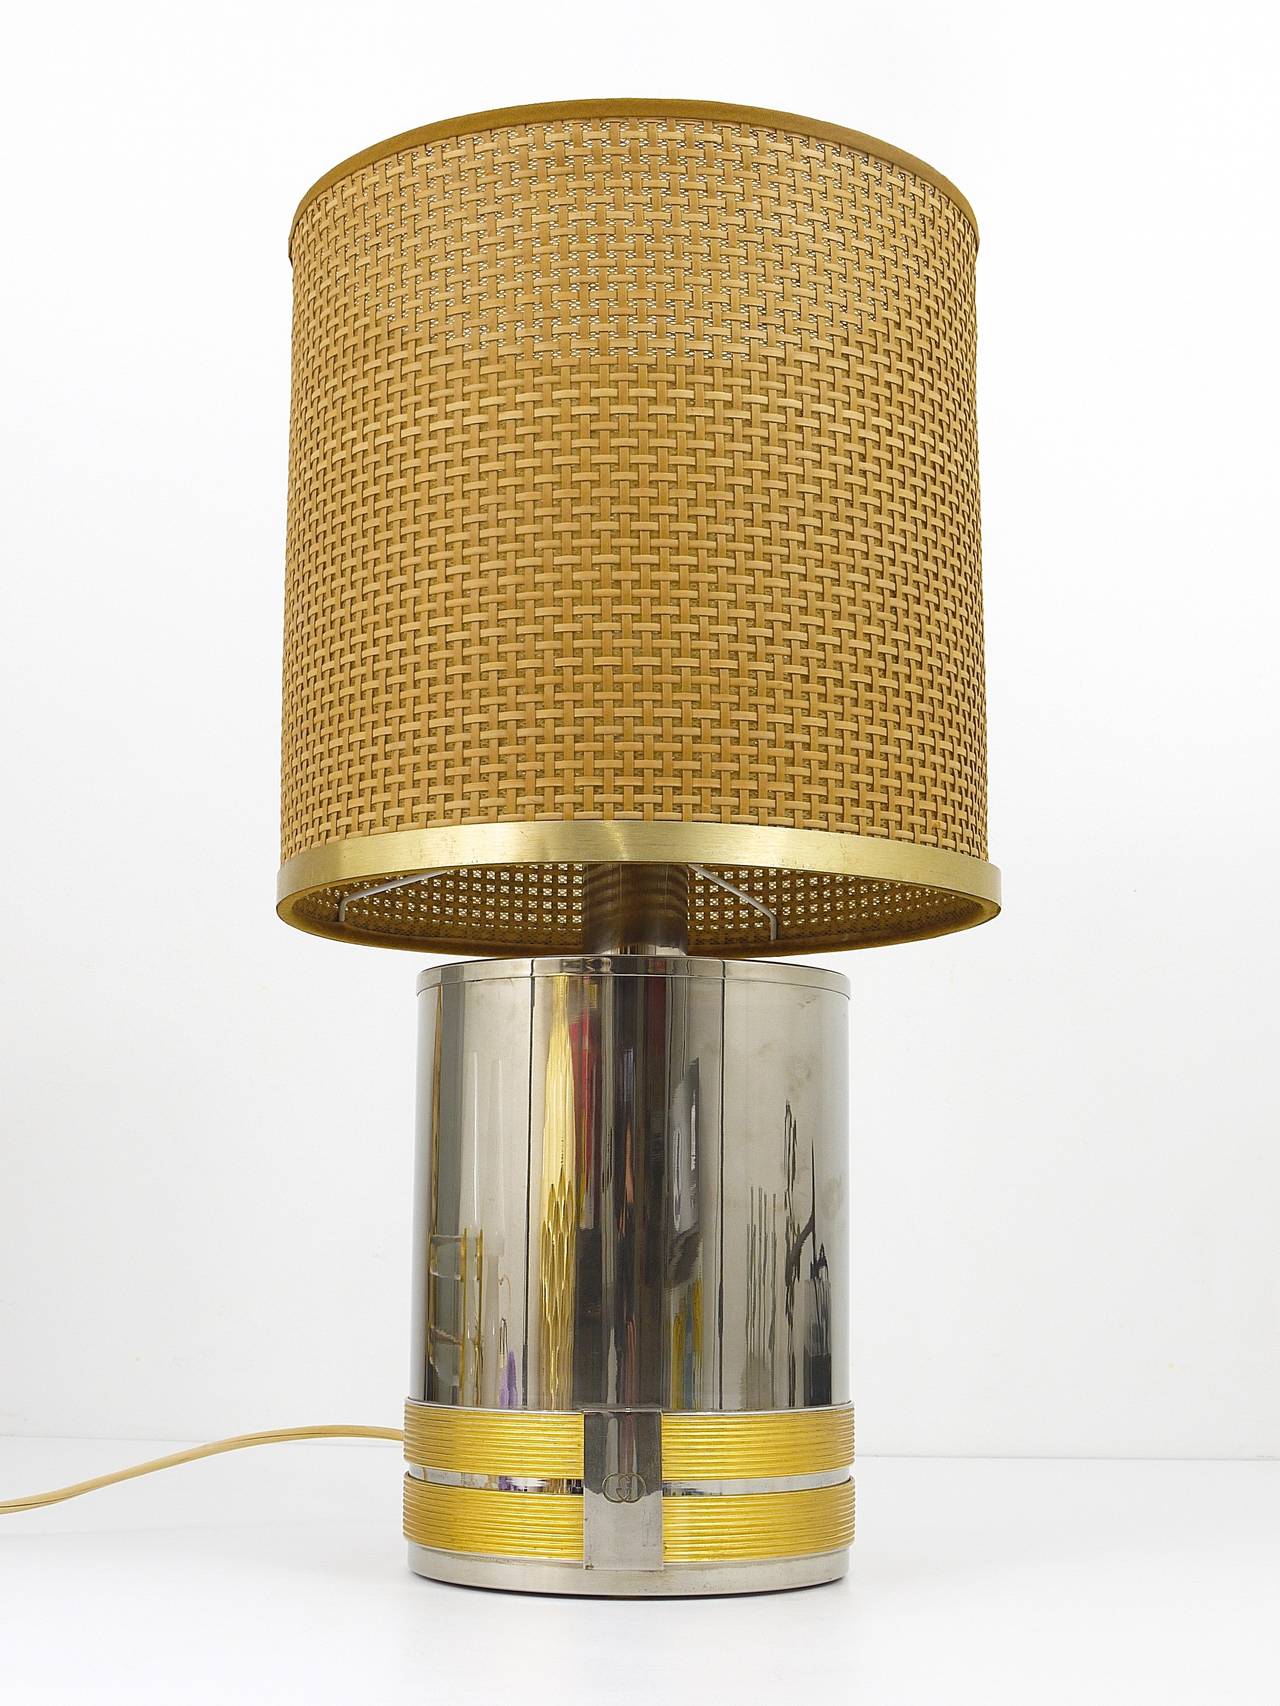 An outstanding lamp, designed and executed by Gucci Italy. A stylish piece, with a chrome-plated base with nice gold-plated details and an embossed Gucci logo.Has a beautiful 